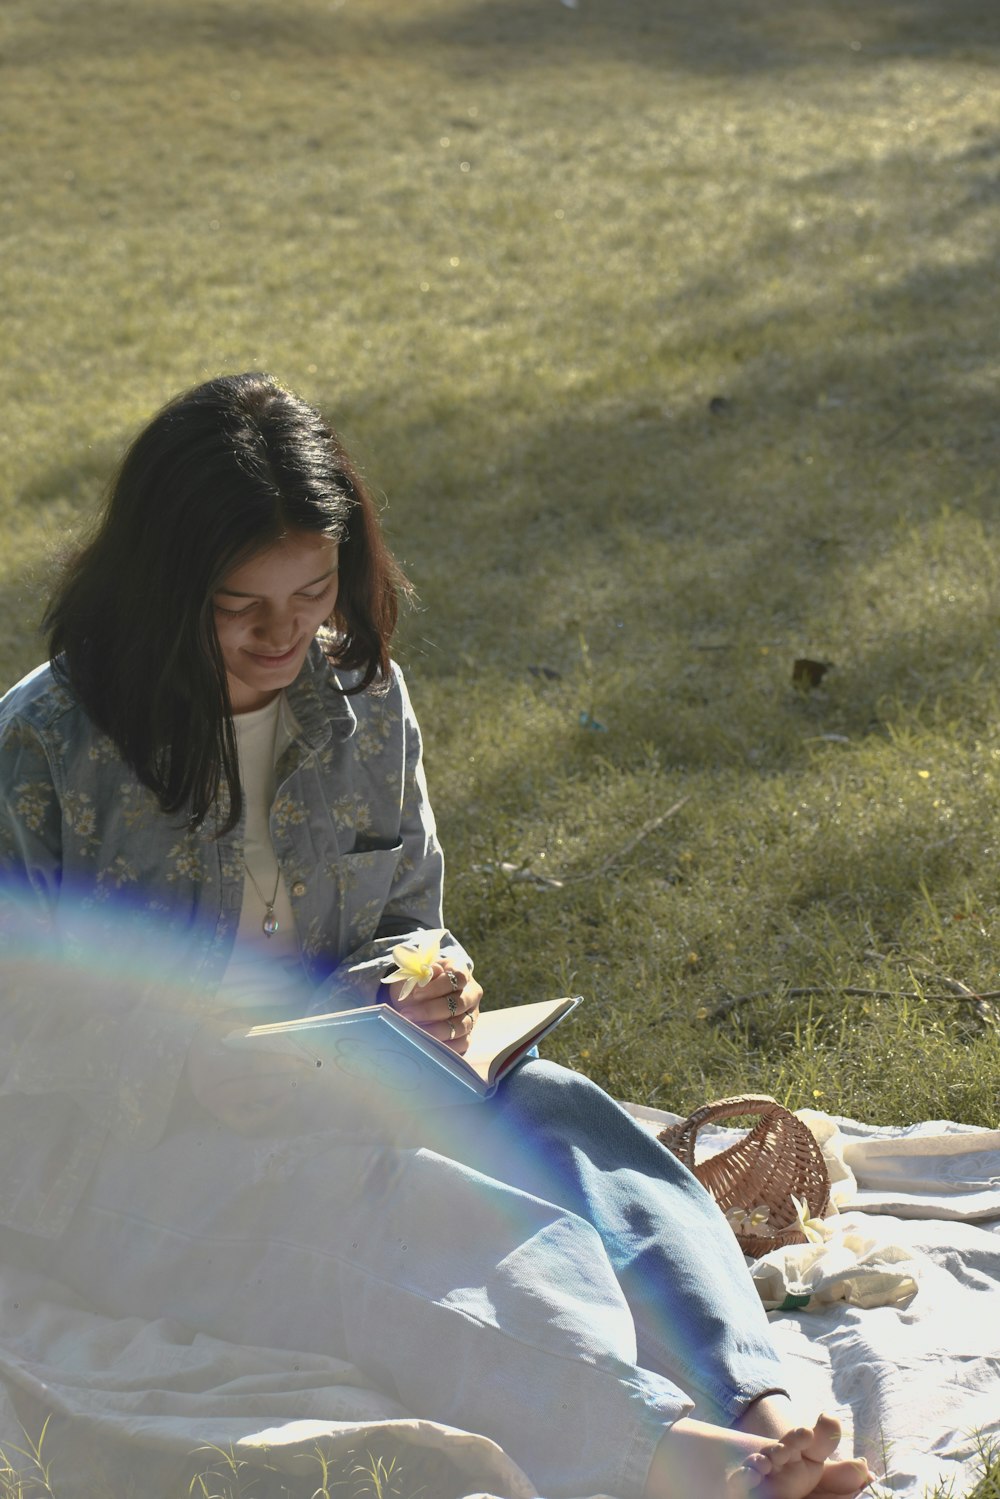 a woman sitting on a blanket in the grass